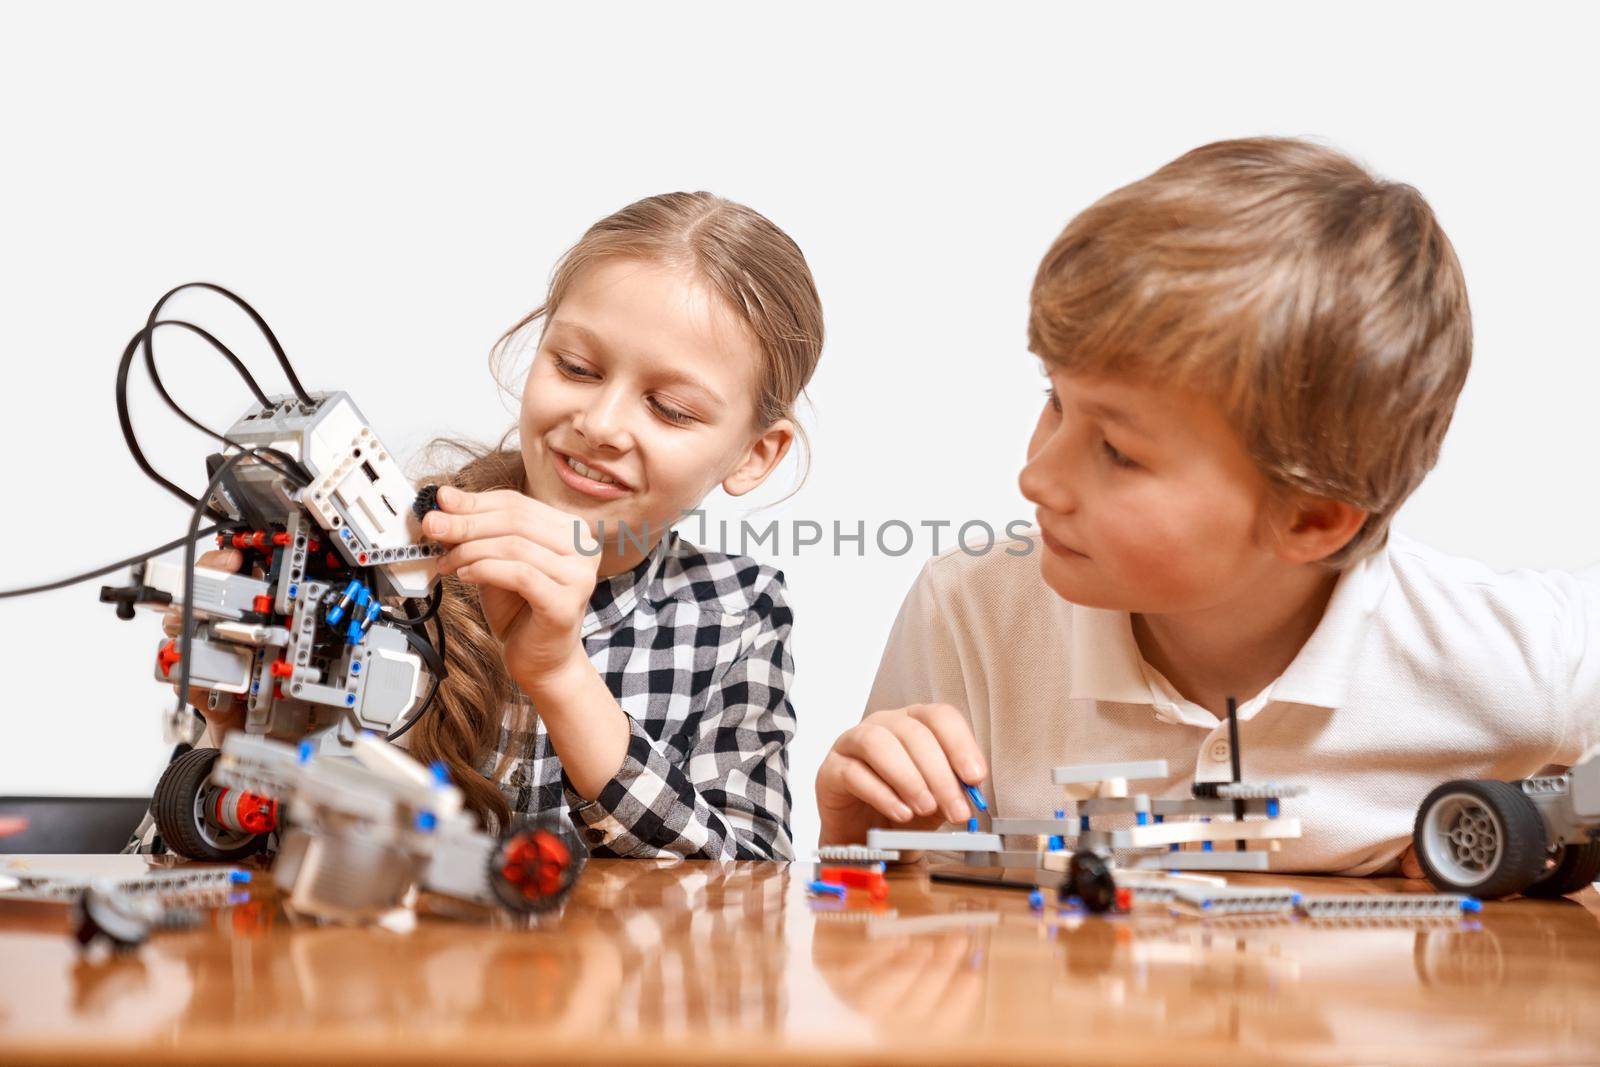 Young friends creating robot using building kit. by SerhiiBobyk